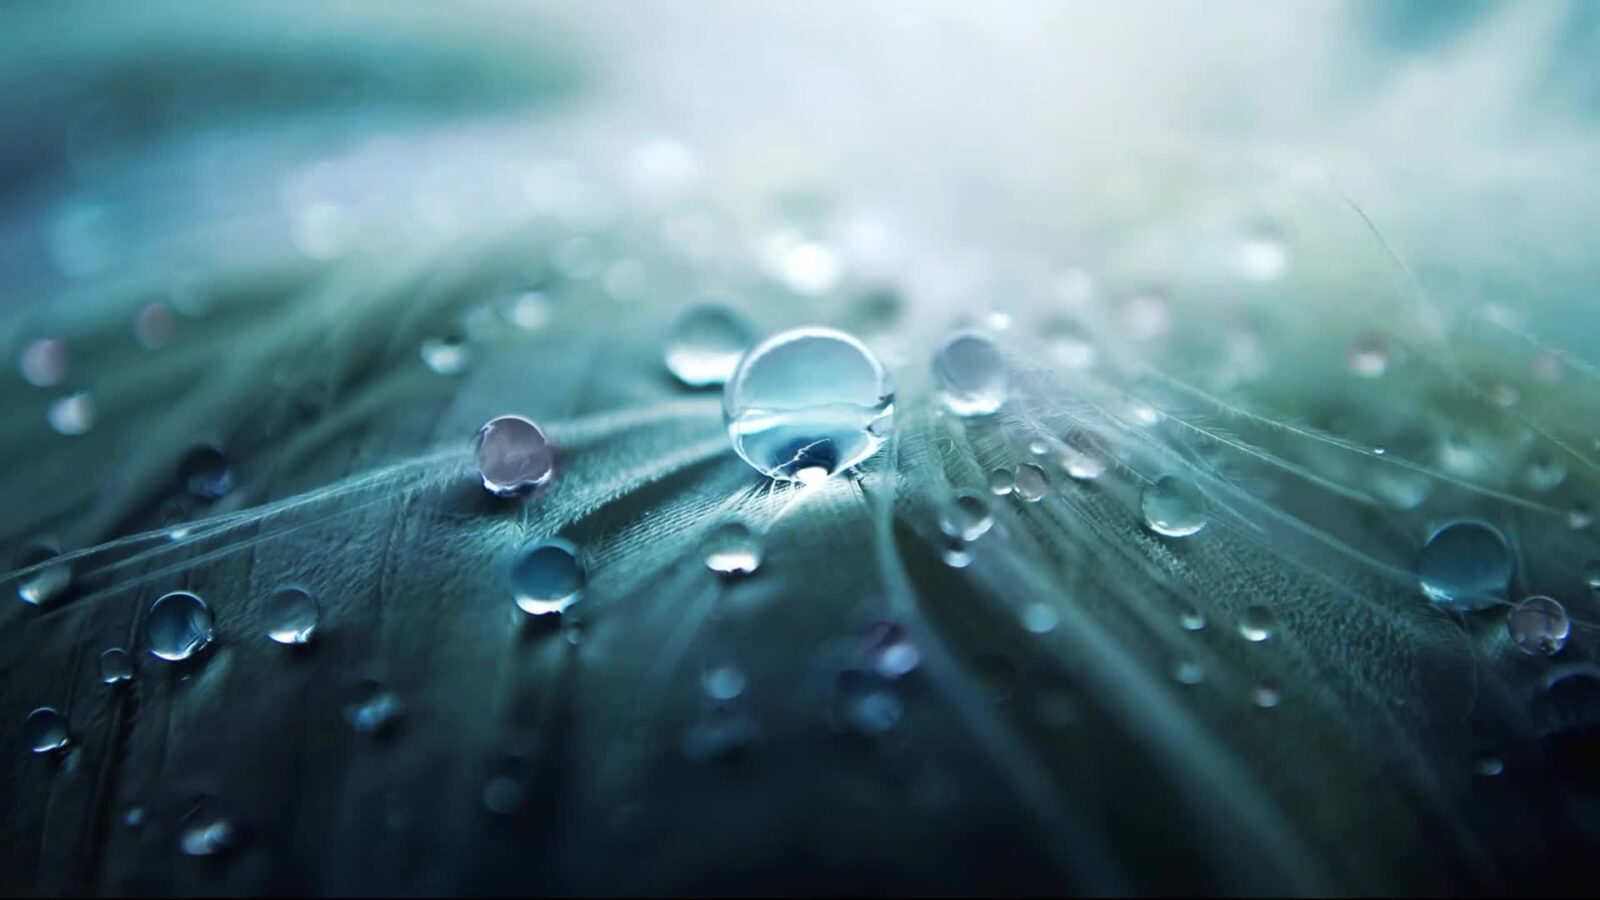 Awesome Crystal Water Drops Leaf - Animated Desktop Wallpaper